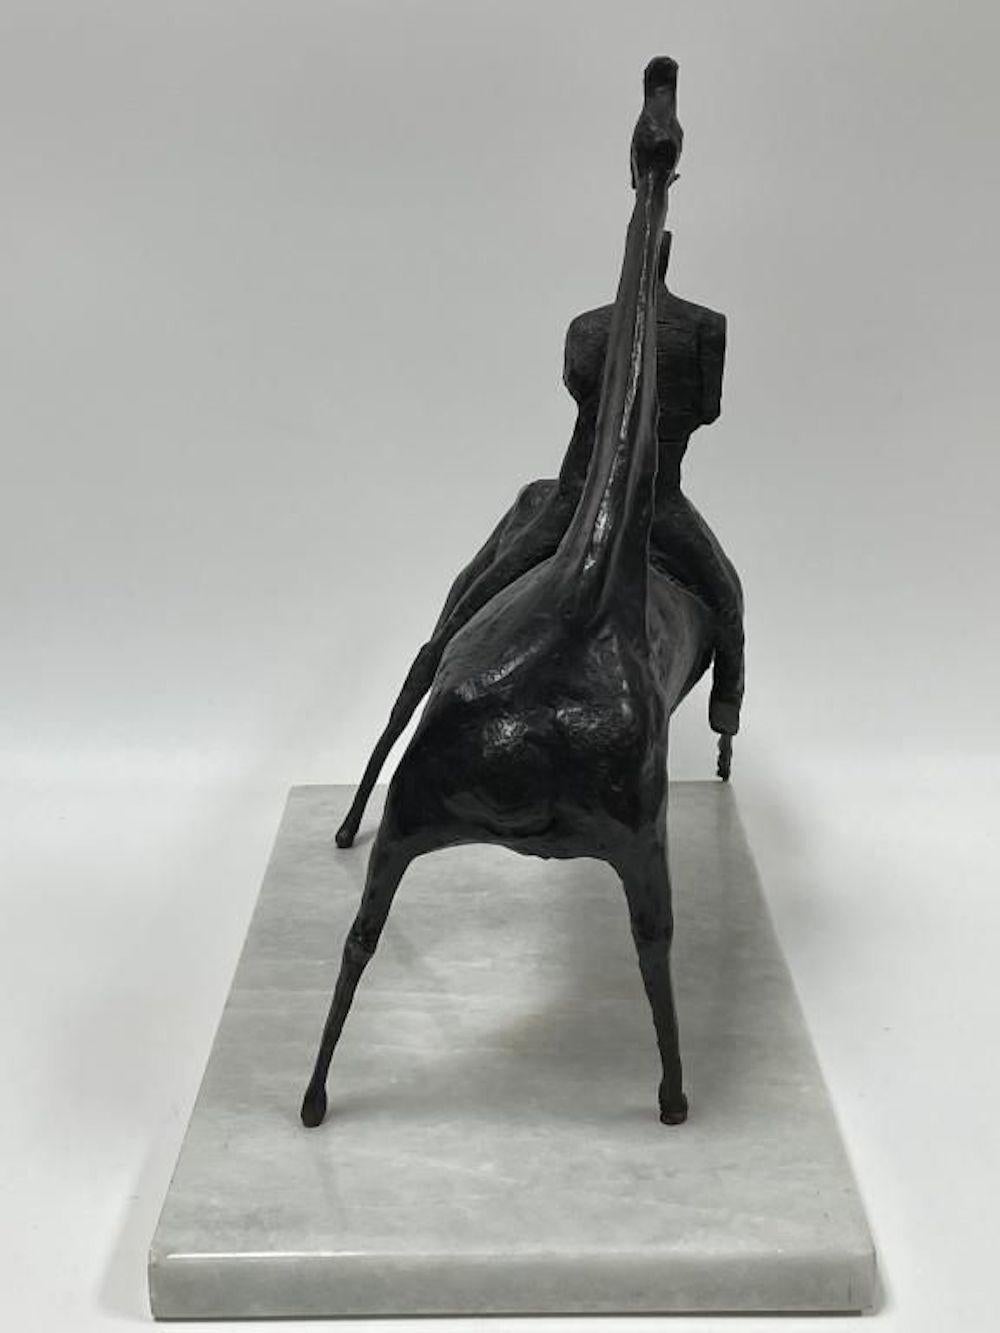 Horse Rider,
Bronze sculpture on marble base, signed, edition 1/6.
Heriberto Juárez (March 16, 1932 – August 26, 2008) was a self-taught Mexican sculptor, known for his depictions of women and animals, especially bulls. As a youth he wanted to be a